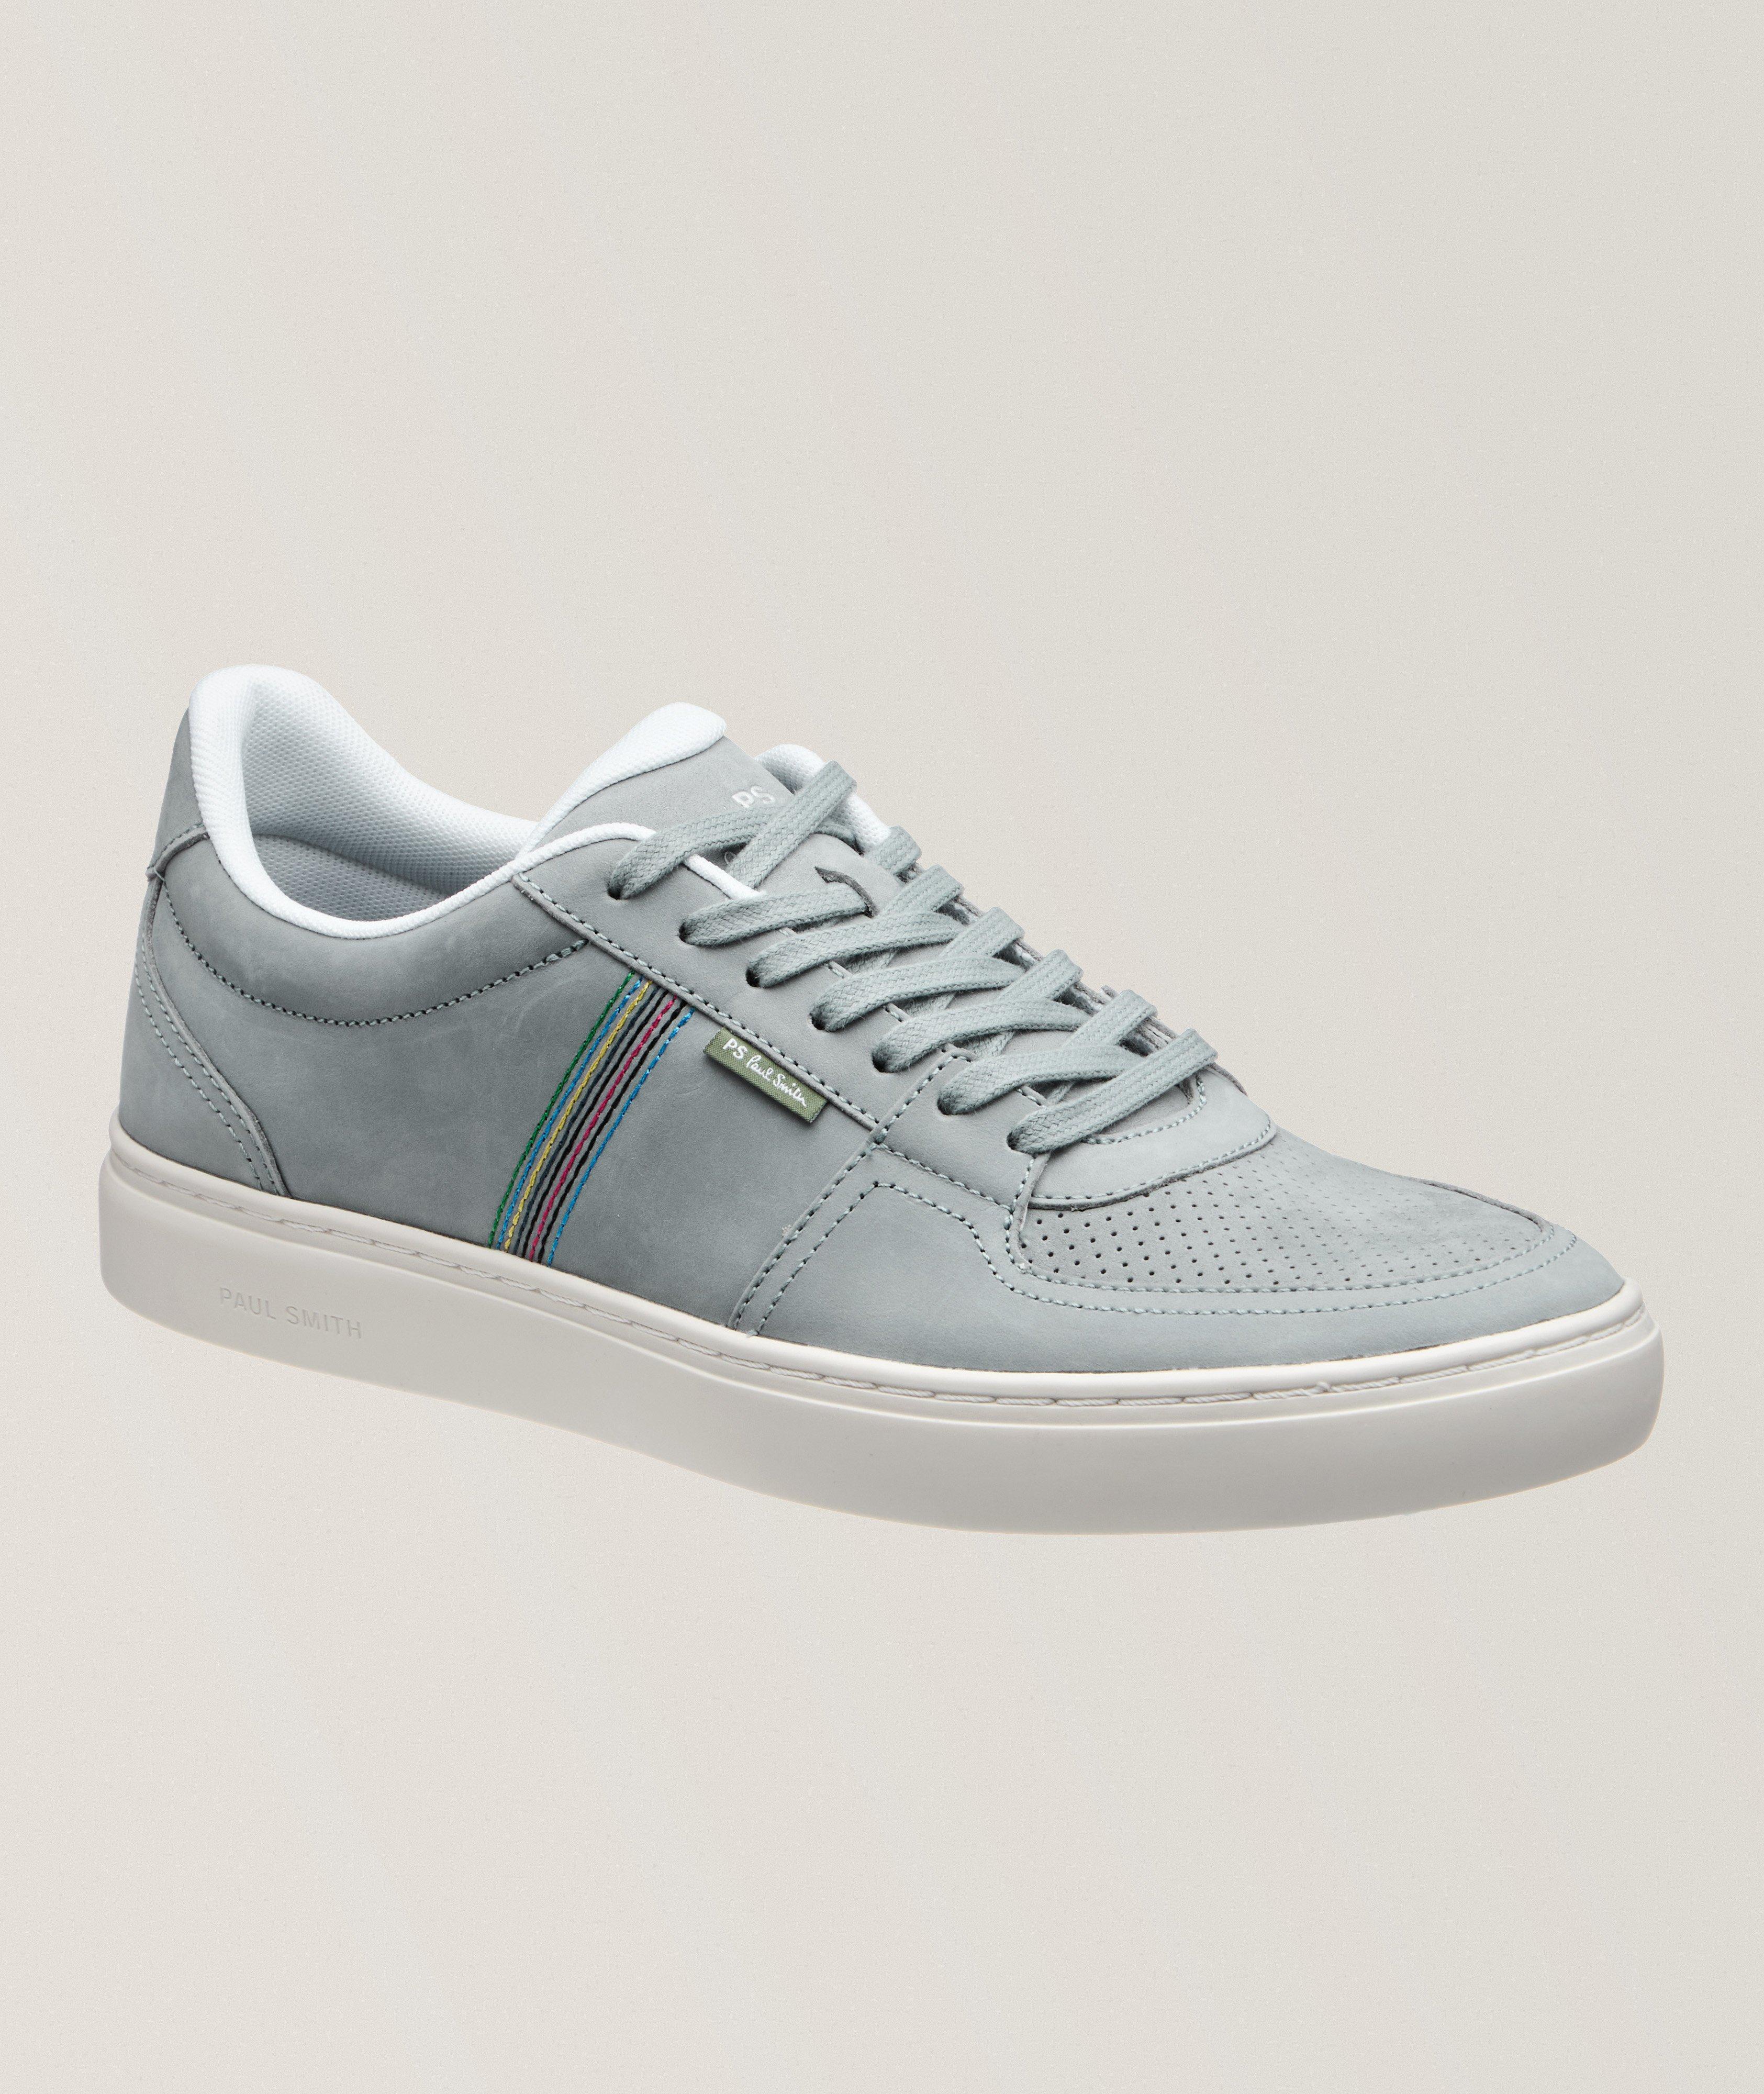 Margate Nubuck Leather Trainers